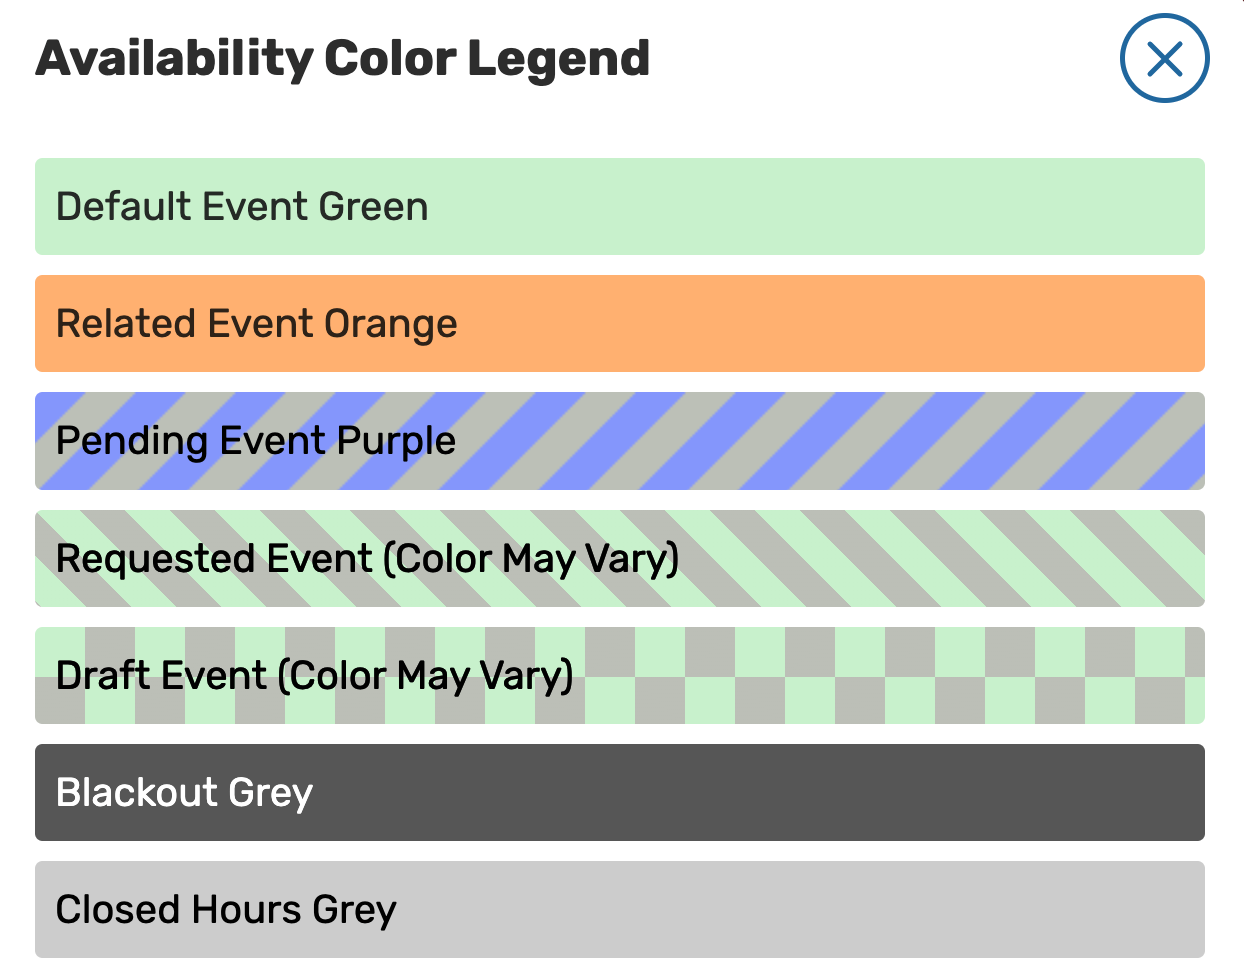 Availability color legend view: Default event green, related event orange, pending event purple, requested event (color may vary), draft event (color may vary), blackout grey, closed hours grey